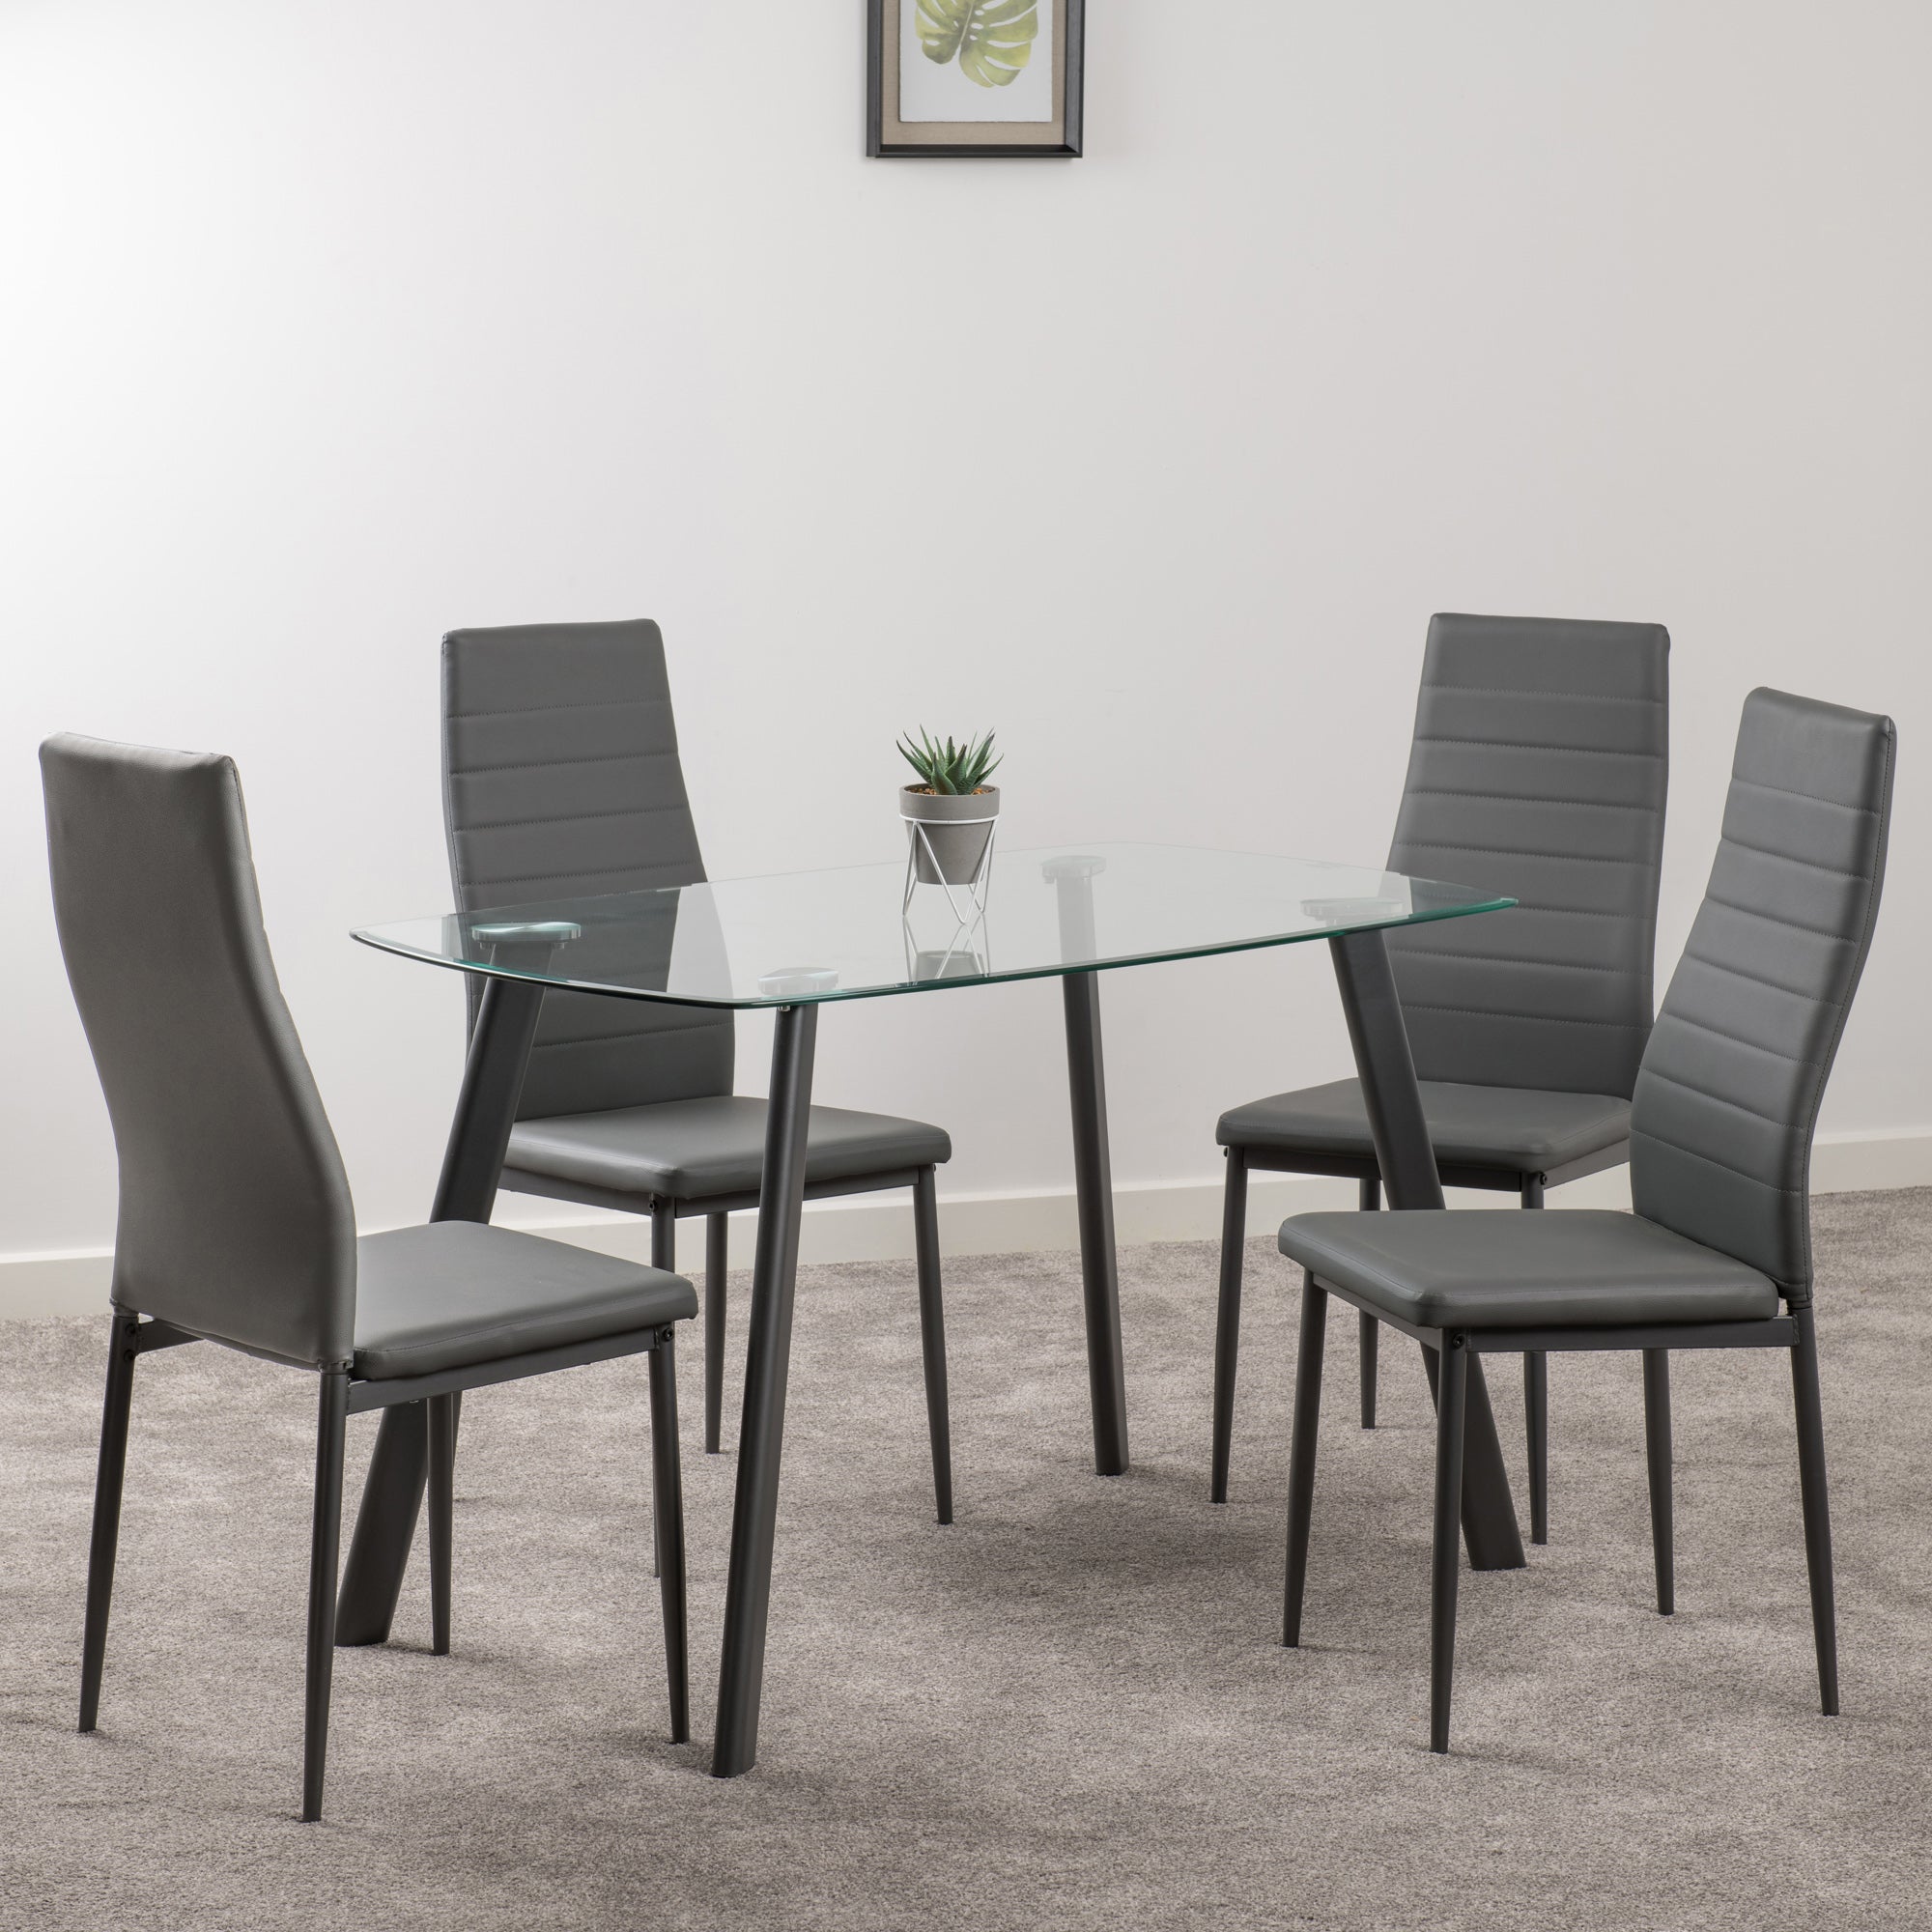 Abbey Rectangular Glass Top Dining Table with 4 Chairs Grey